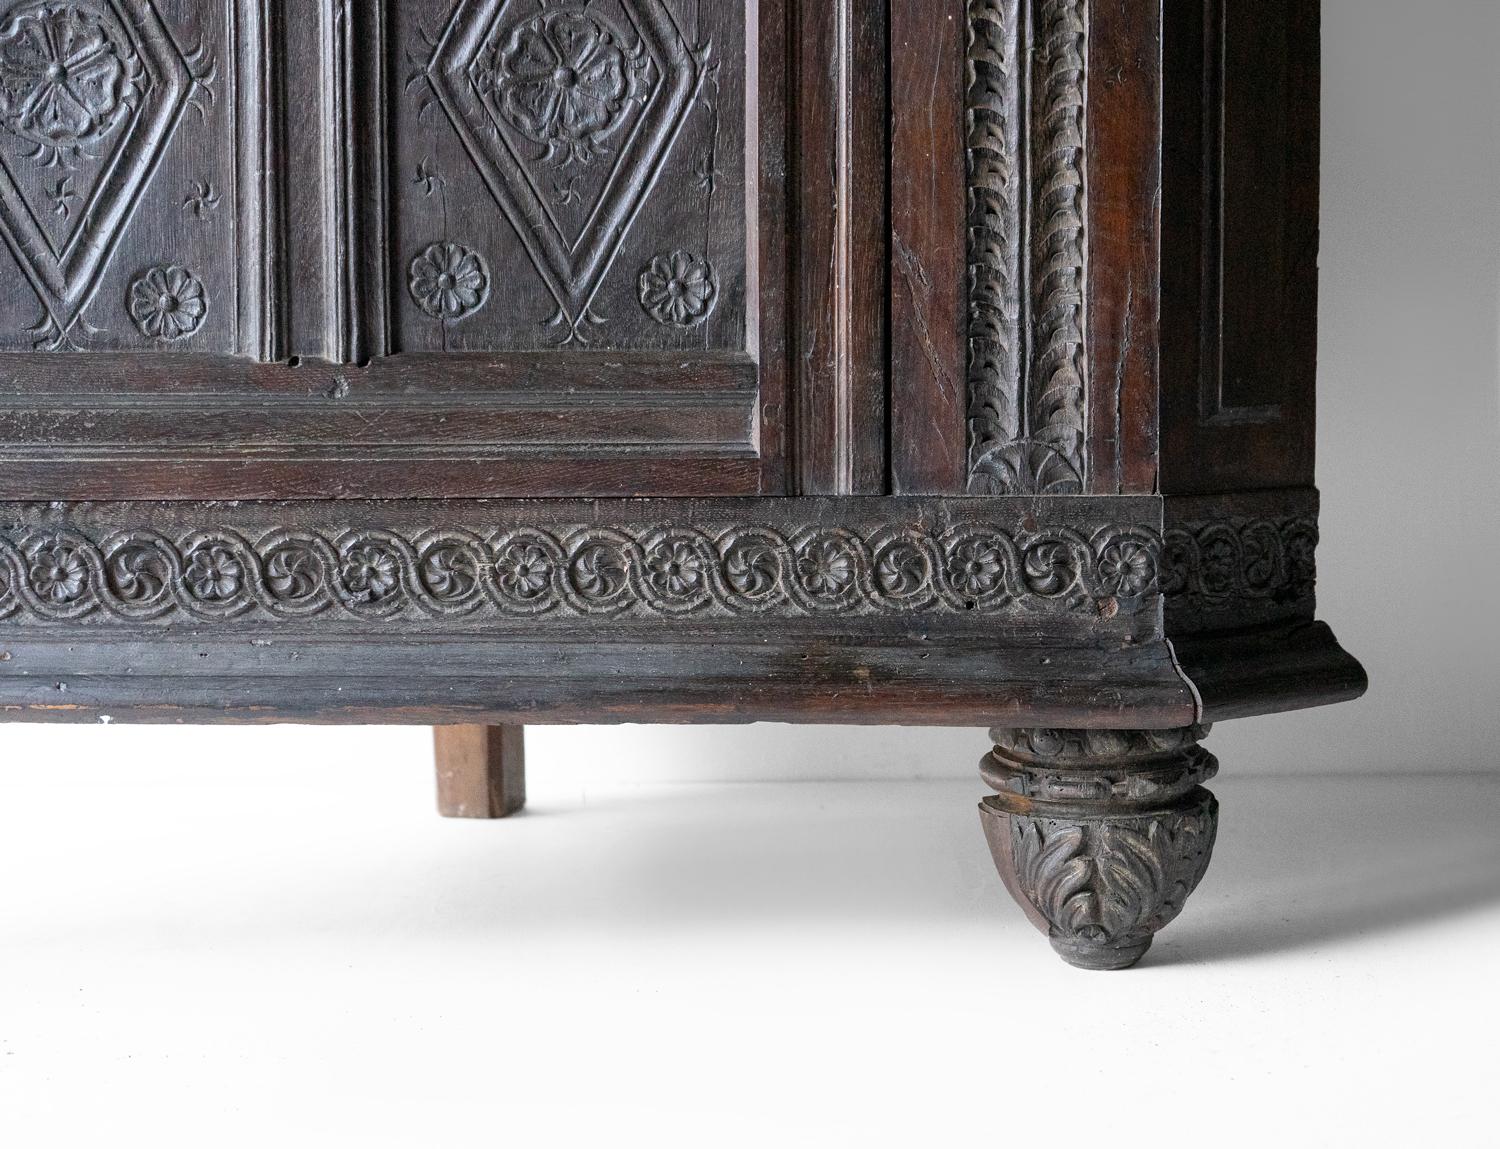  Large Antique Freestanding Carved Oak Corner Cabinet Cupboard, 17th Century In Good Condition For Sale In Bristol, GB